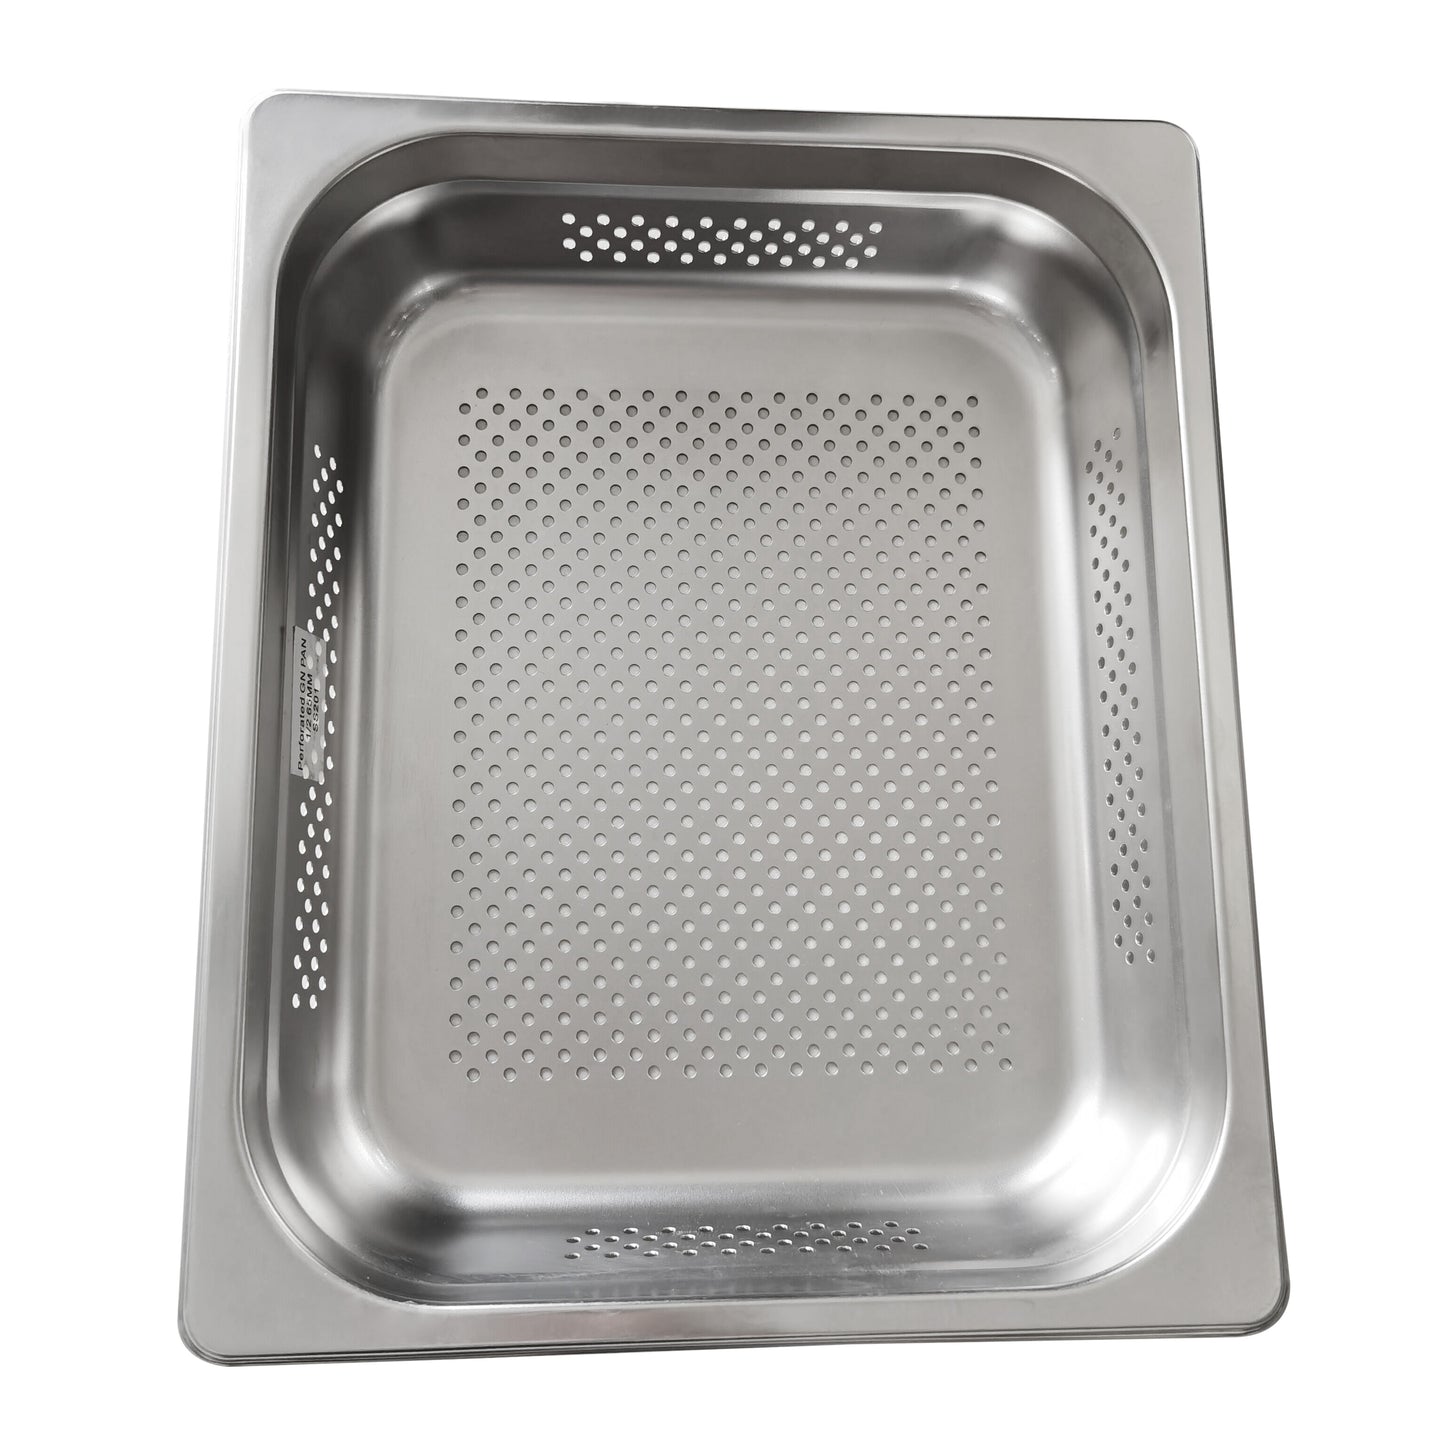 301067 - Stainless Steel Perforated Gastronorm Pan GN 1/1 Depth 200mm (1 box/6 units)